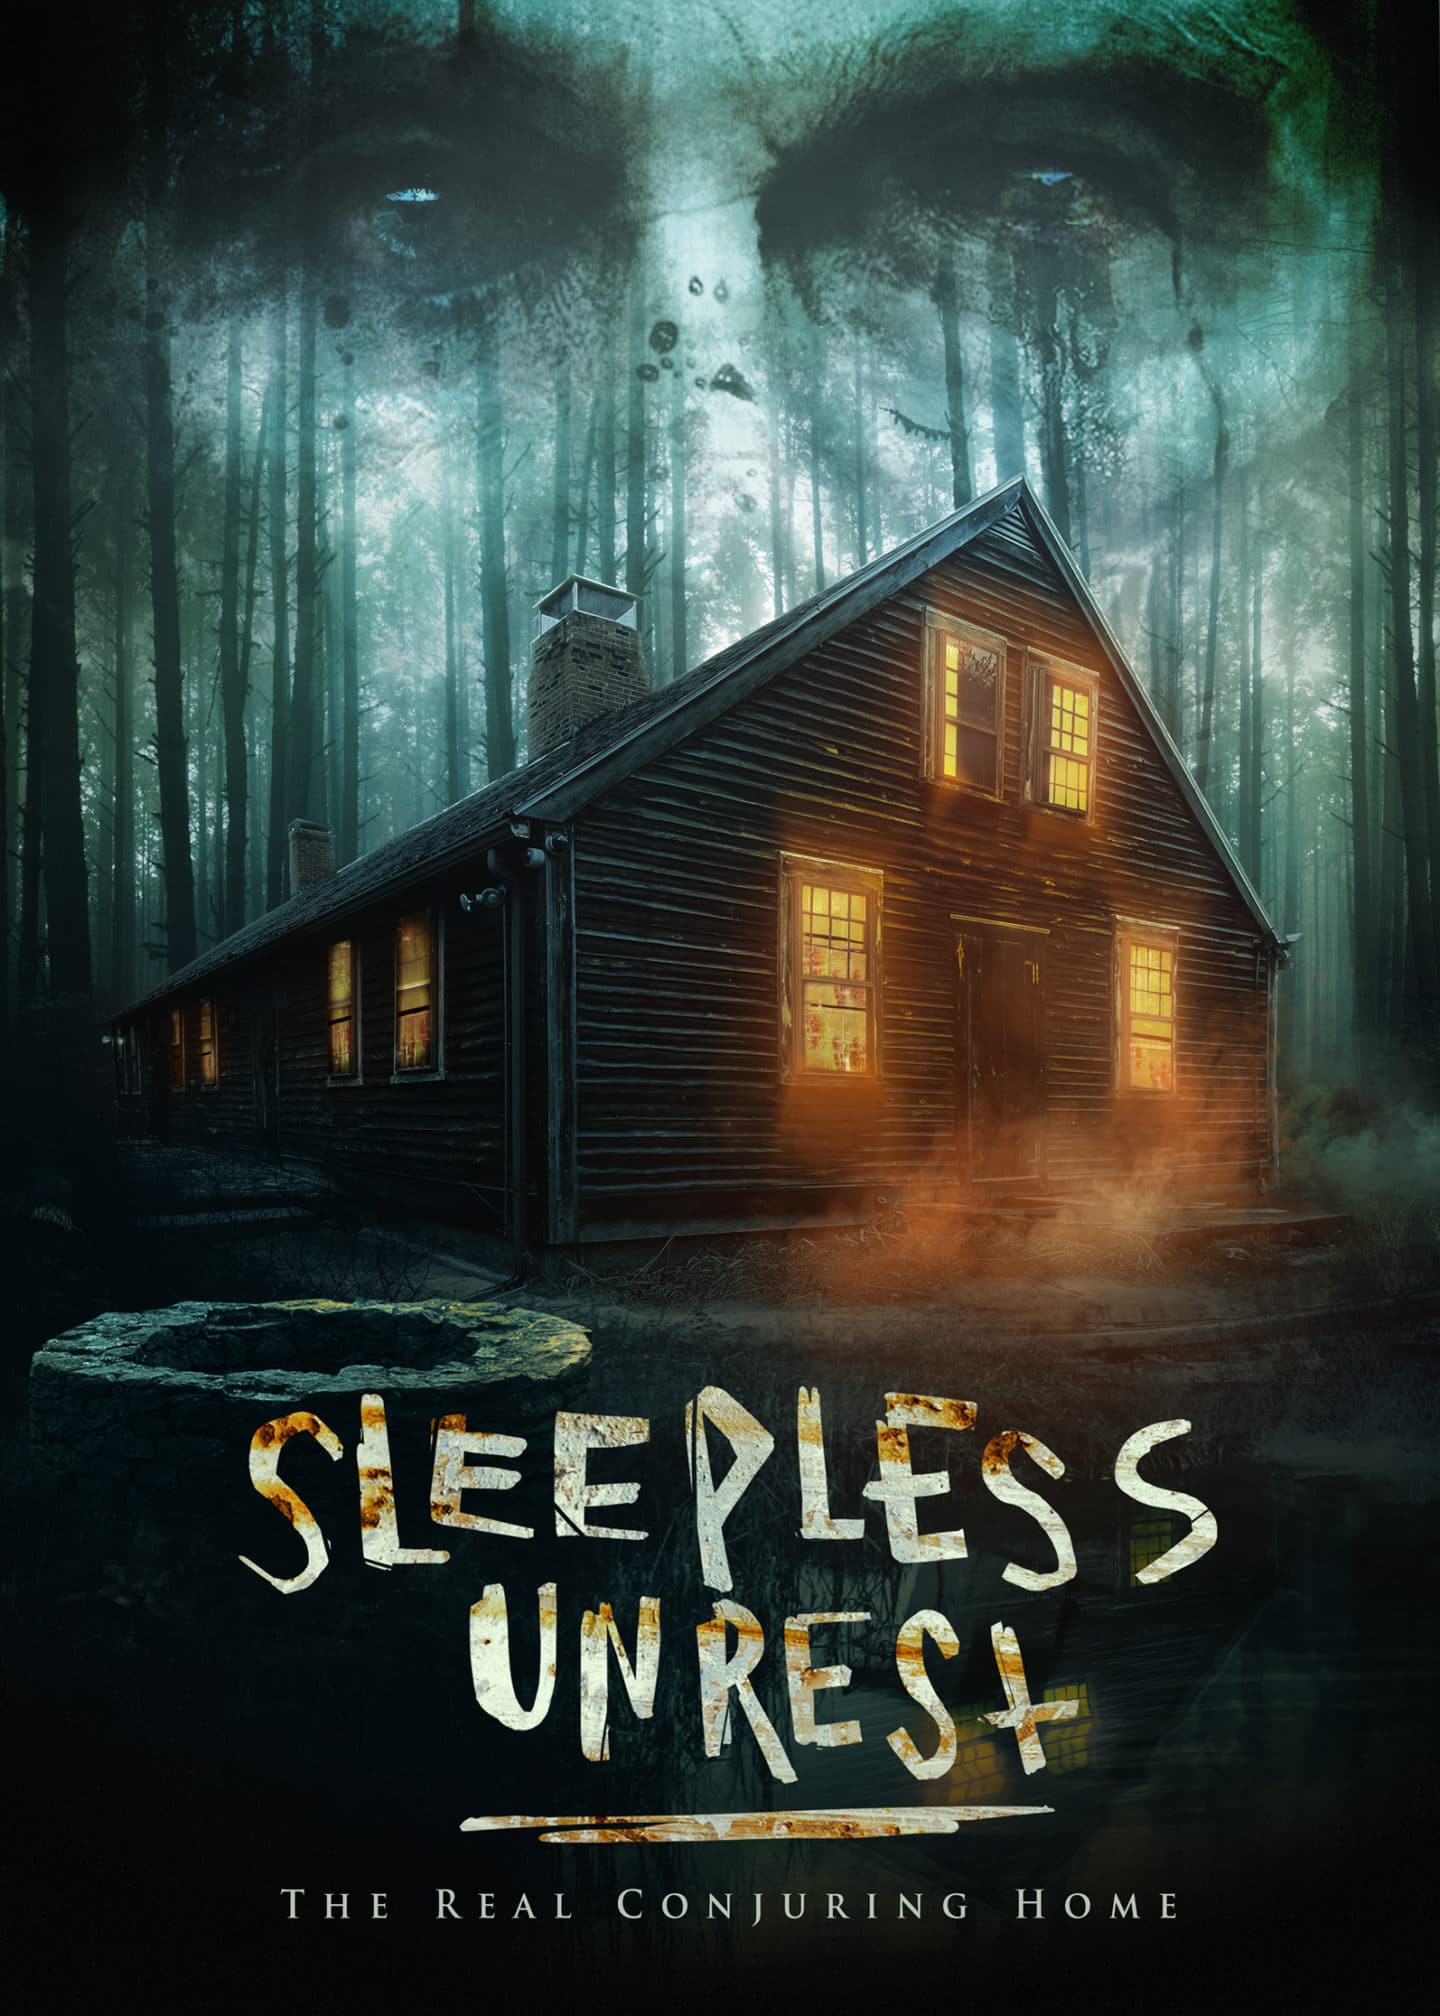 The Sleepless Unrest The Real Conjuring Home – Teaser Poster